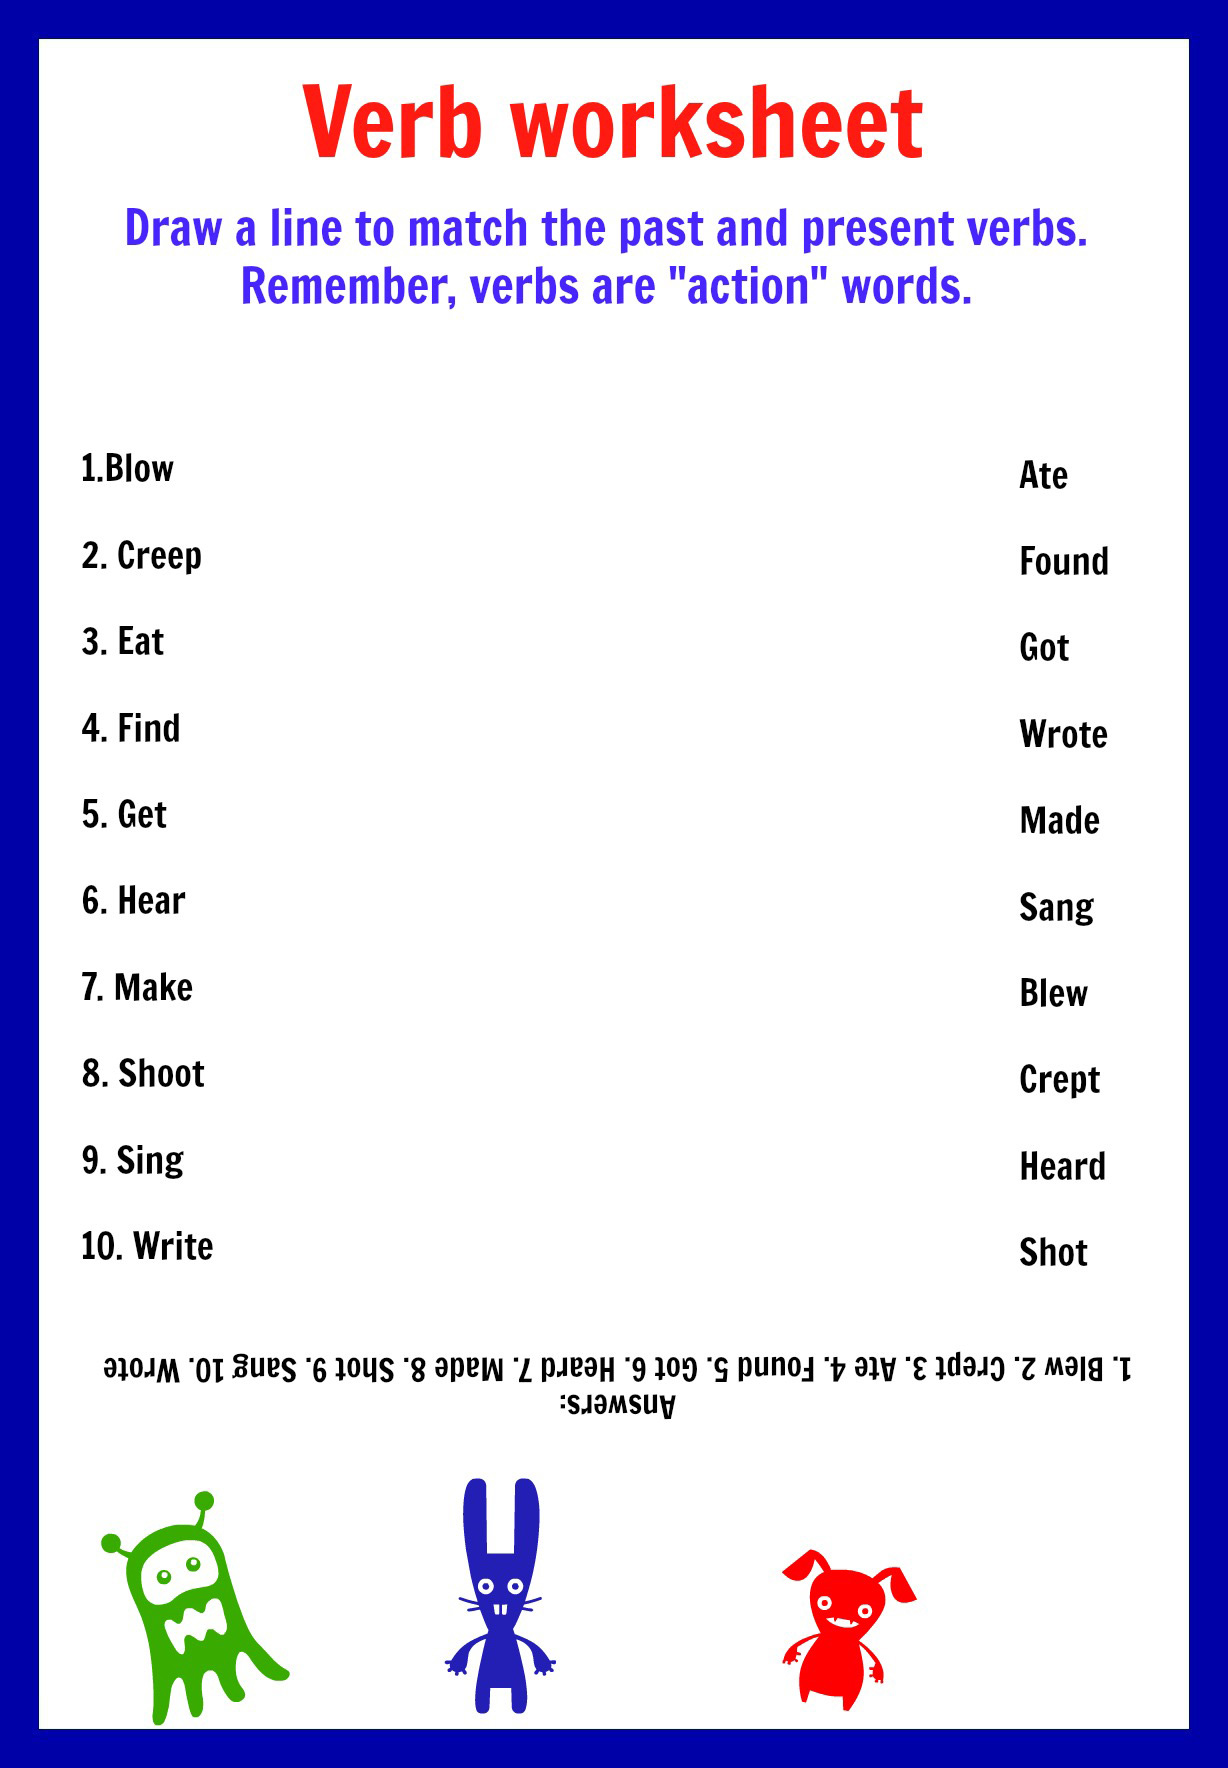 listening-and-writing-verb-practice-1-interactive-worksheet